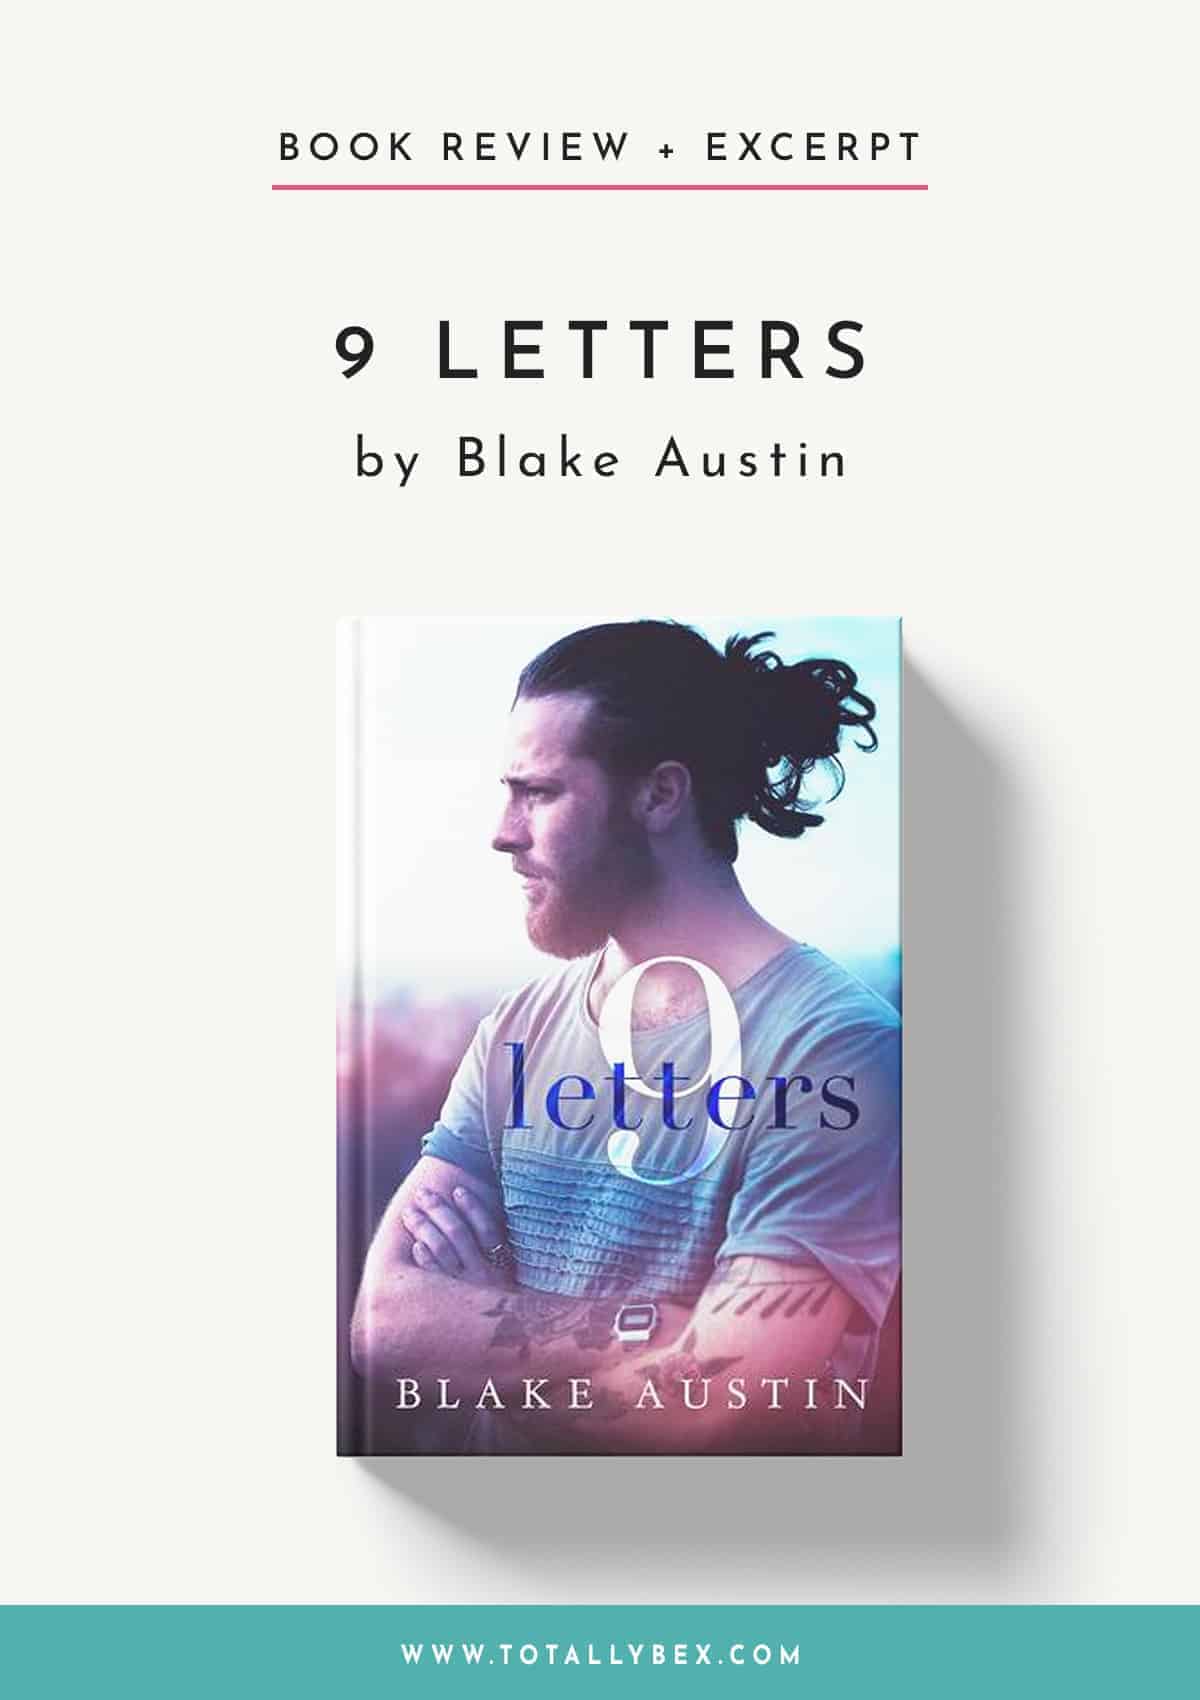 Nine Letters by Blake Austin – Review + Excerpt